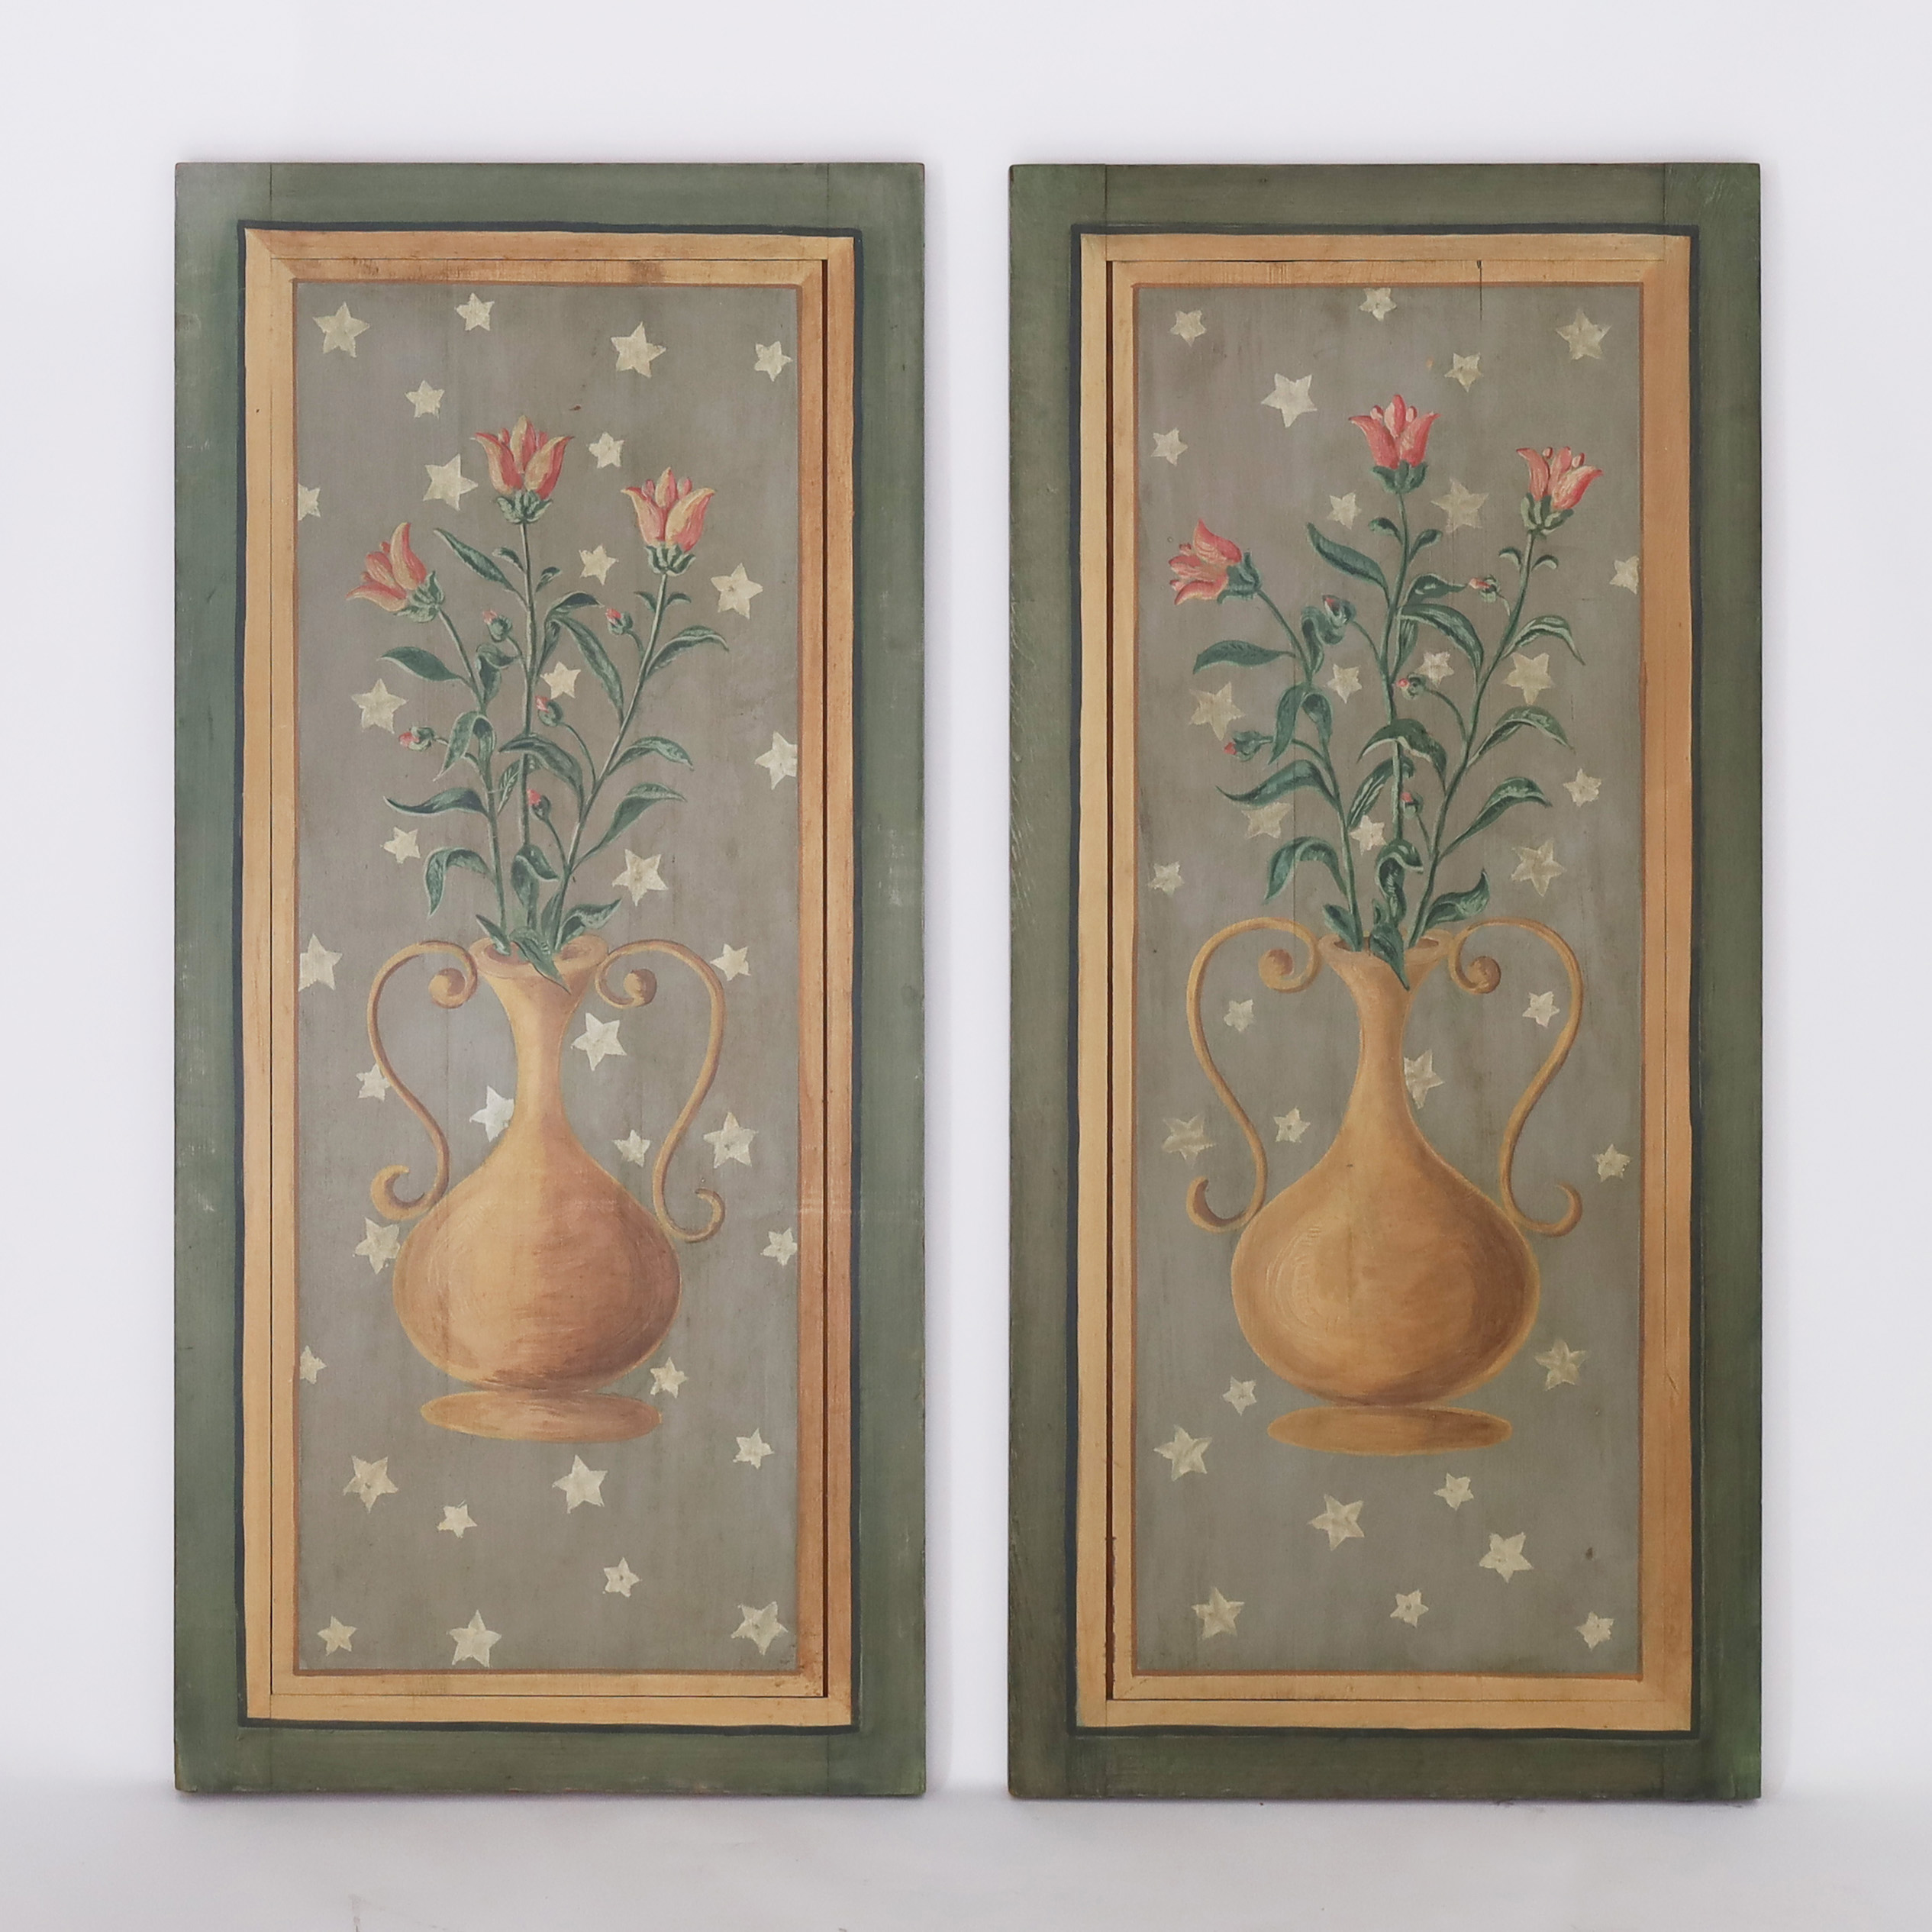 Pair of Antique Wood Decorative Painted Panels From Palm Beach Estate